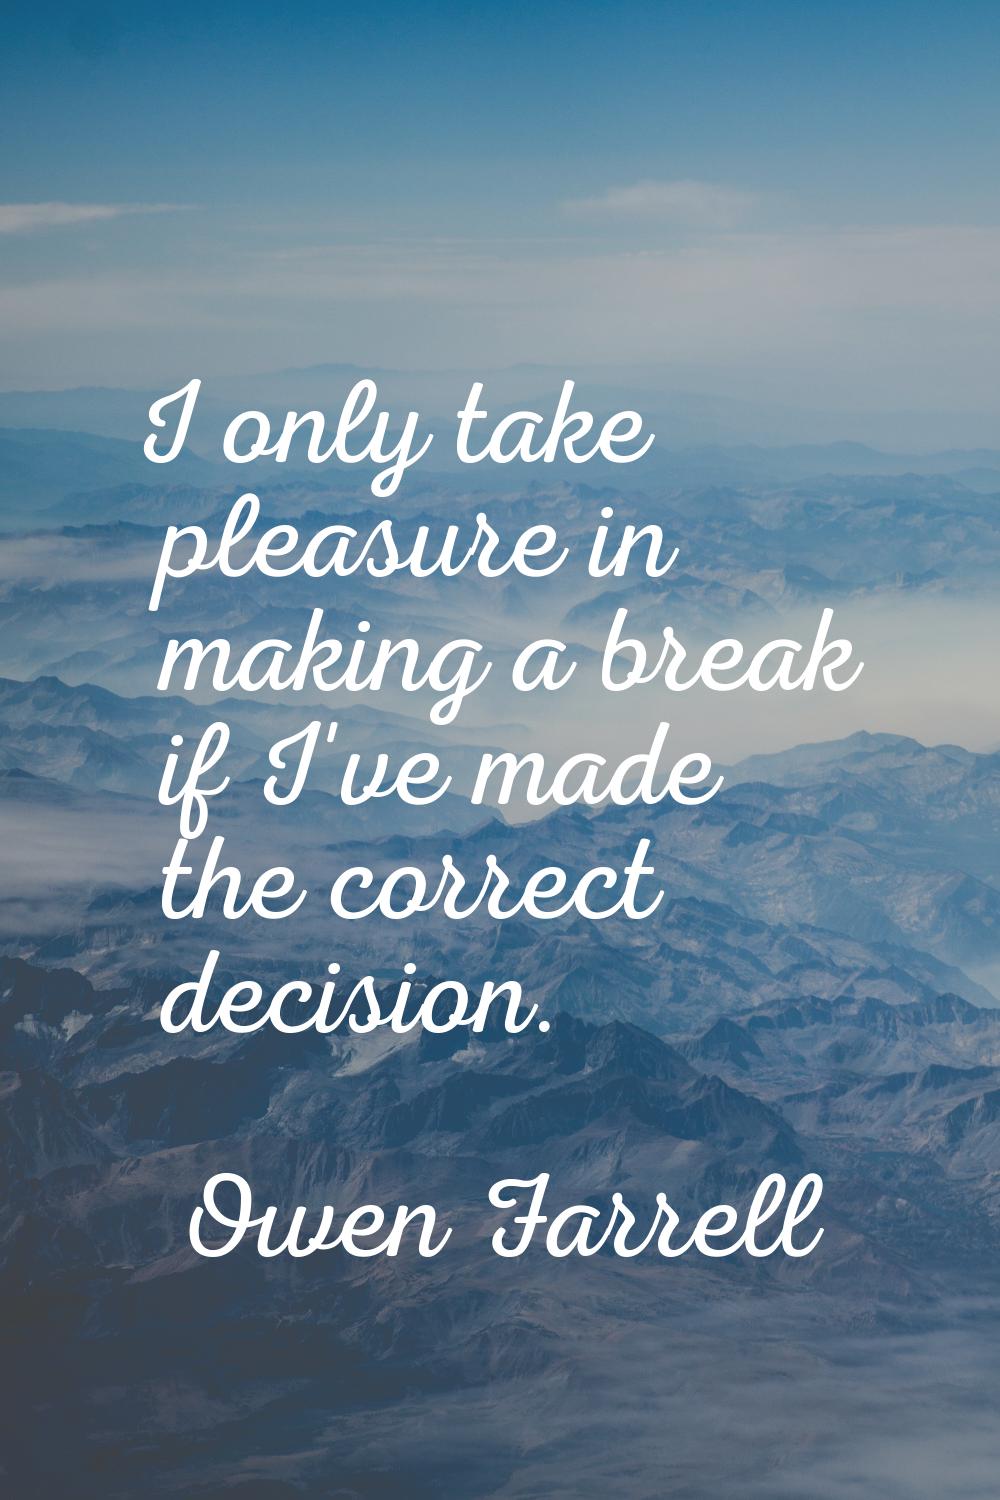 I only take pleasure in making a break if I've made the correct decision.